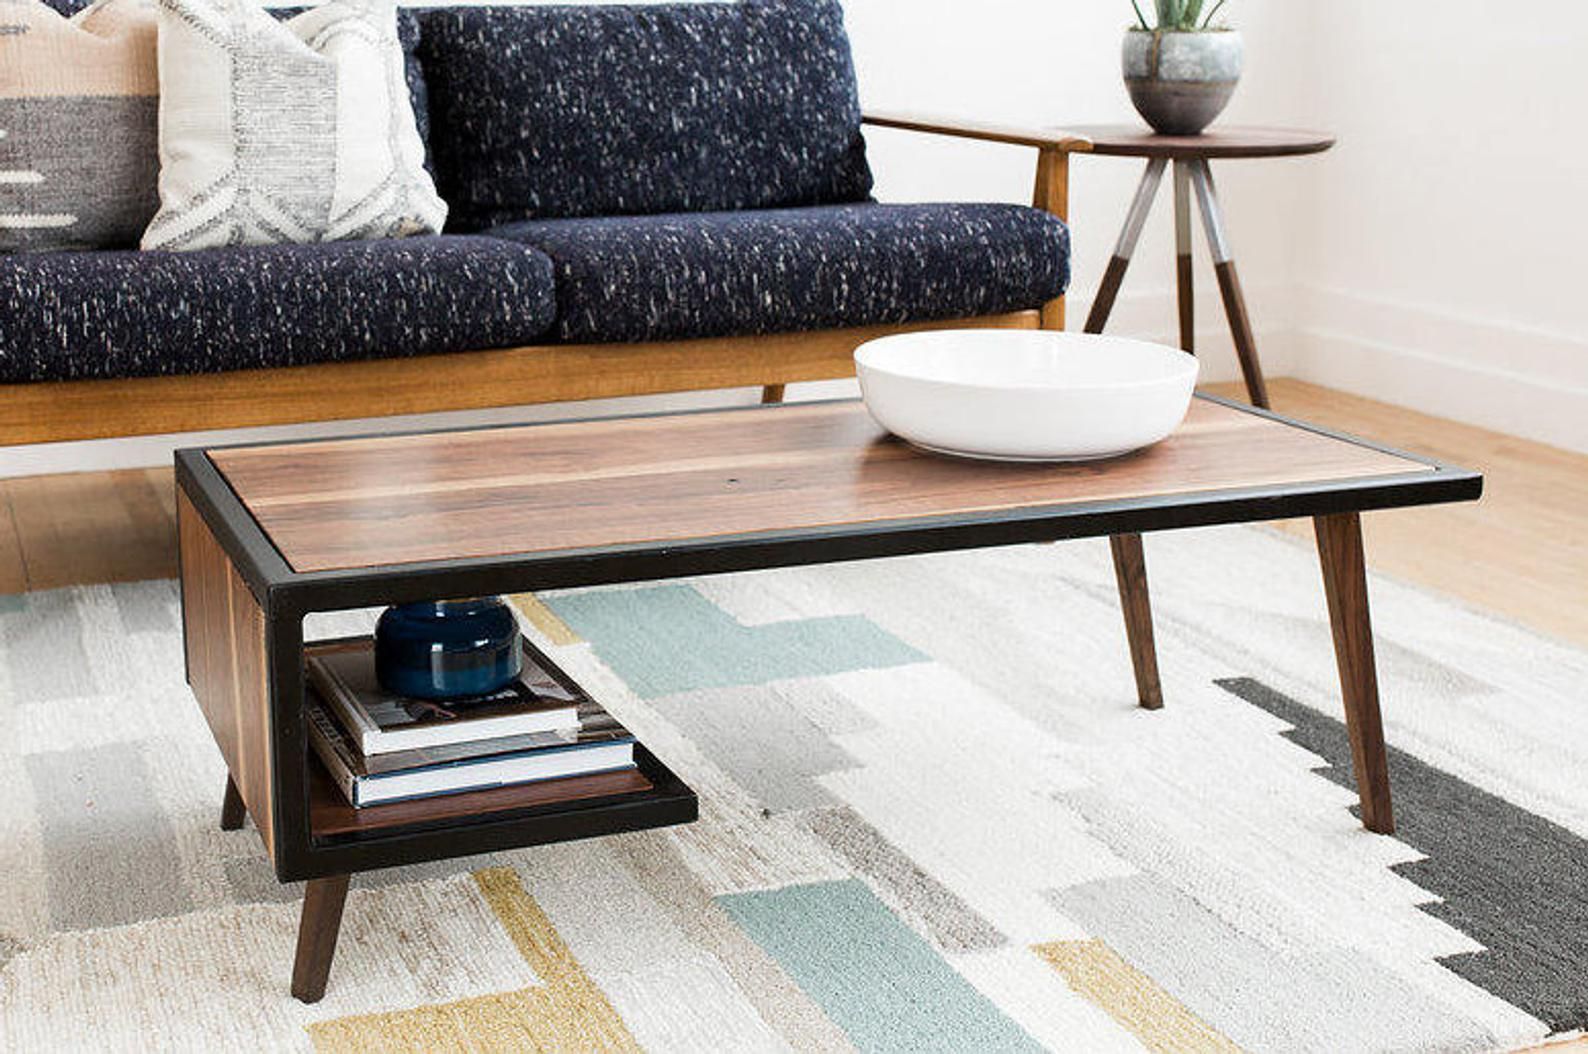 Mid Century Modern Style Coffee Tables You'll Love – Home With Regard To Mid Century Modern Coffee Tables (View 6 of 20)